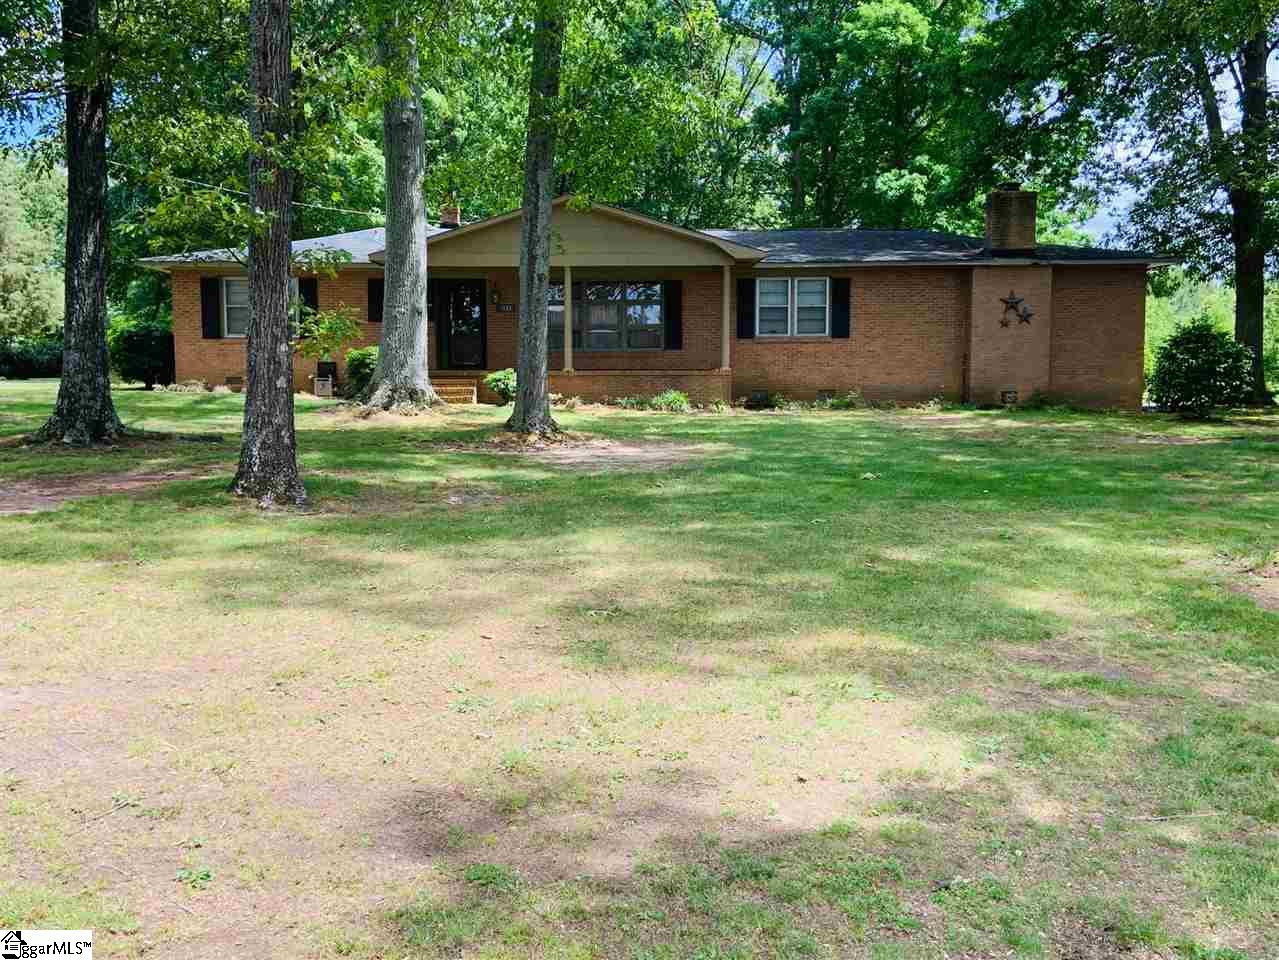 Call today for a personal showing of the 3 bedroom brick home in Pelzer! Walking distance from the Elementary school! Anderson School District One Schools! Sit around at the cozy fire place in the spacious living room. This home features an attached carport and detached 2 car garage with 1 acre of land!